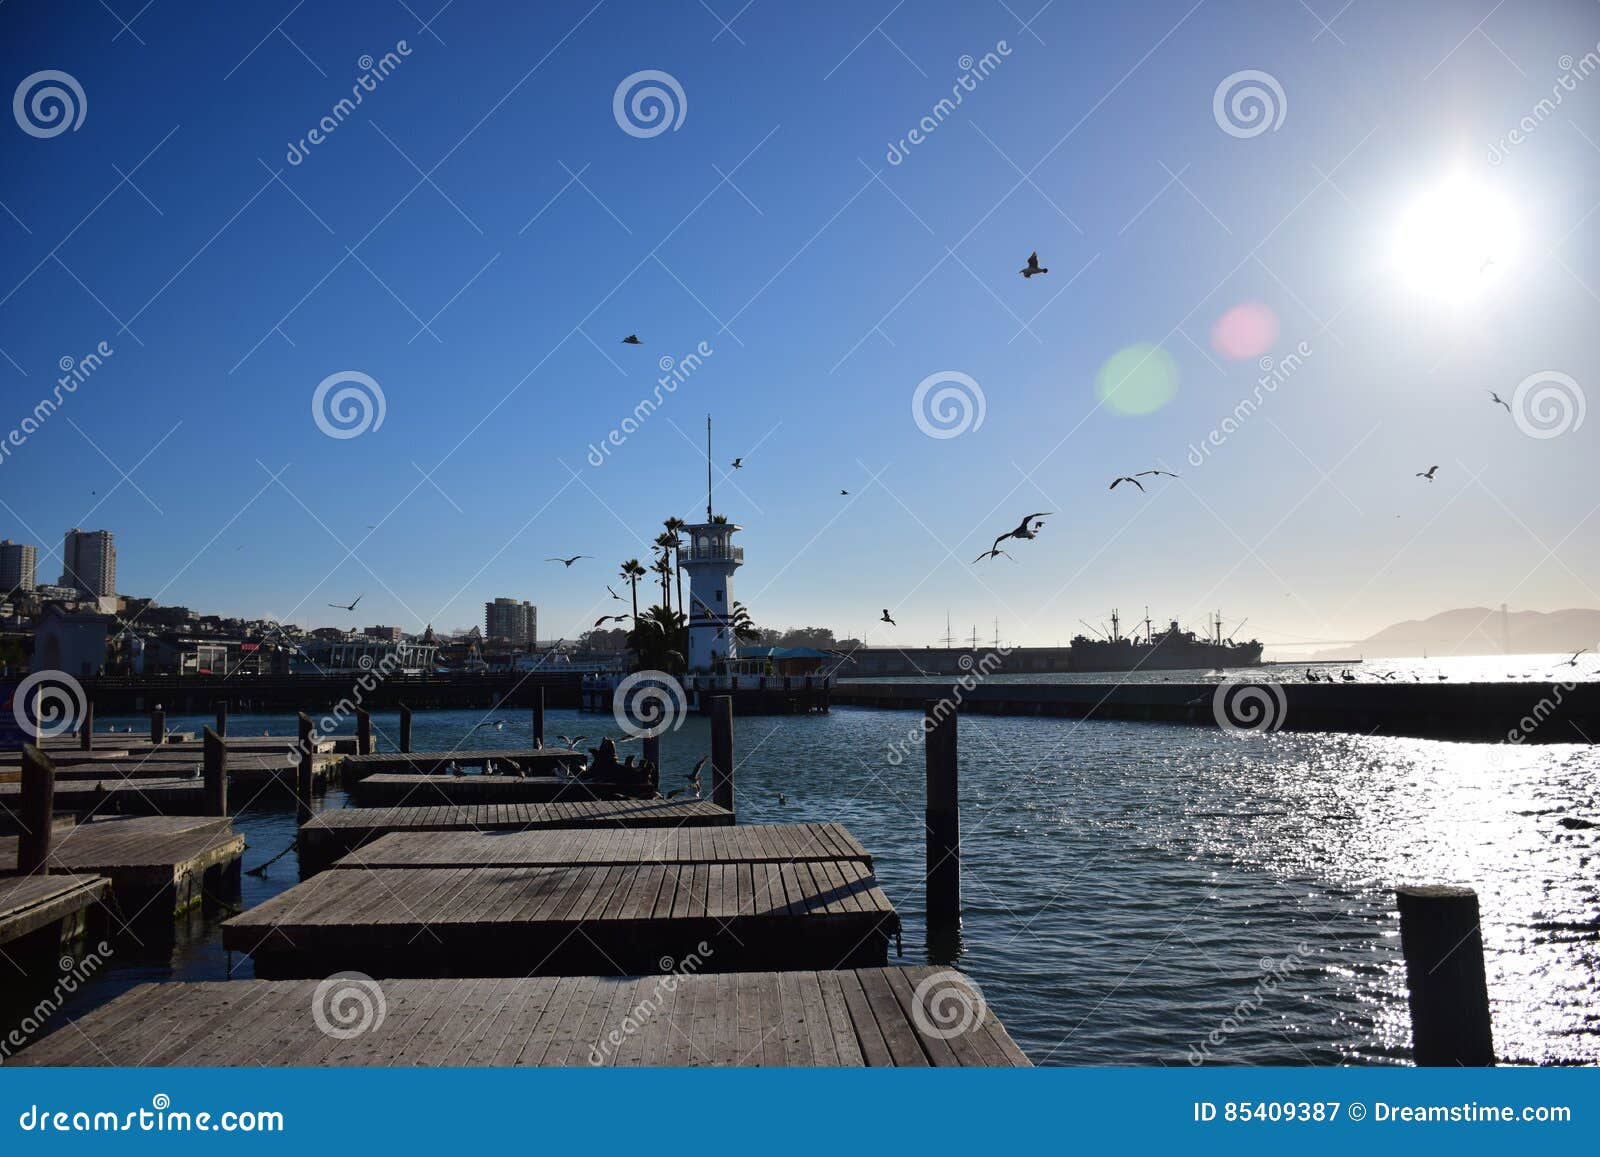 pier 39 in san francisco during a sunny cloudless day with seals and seagulls